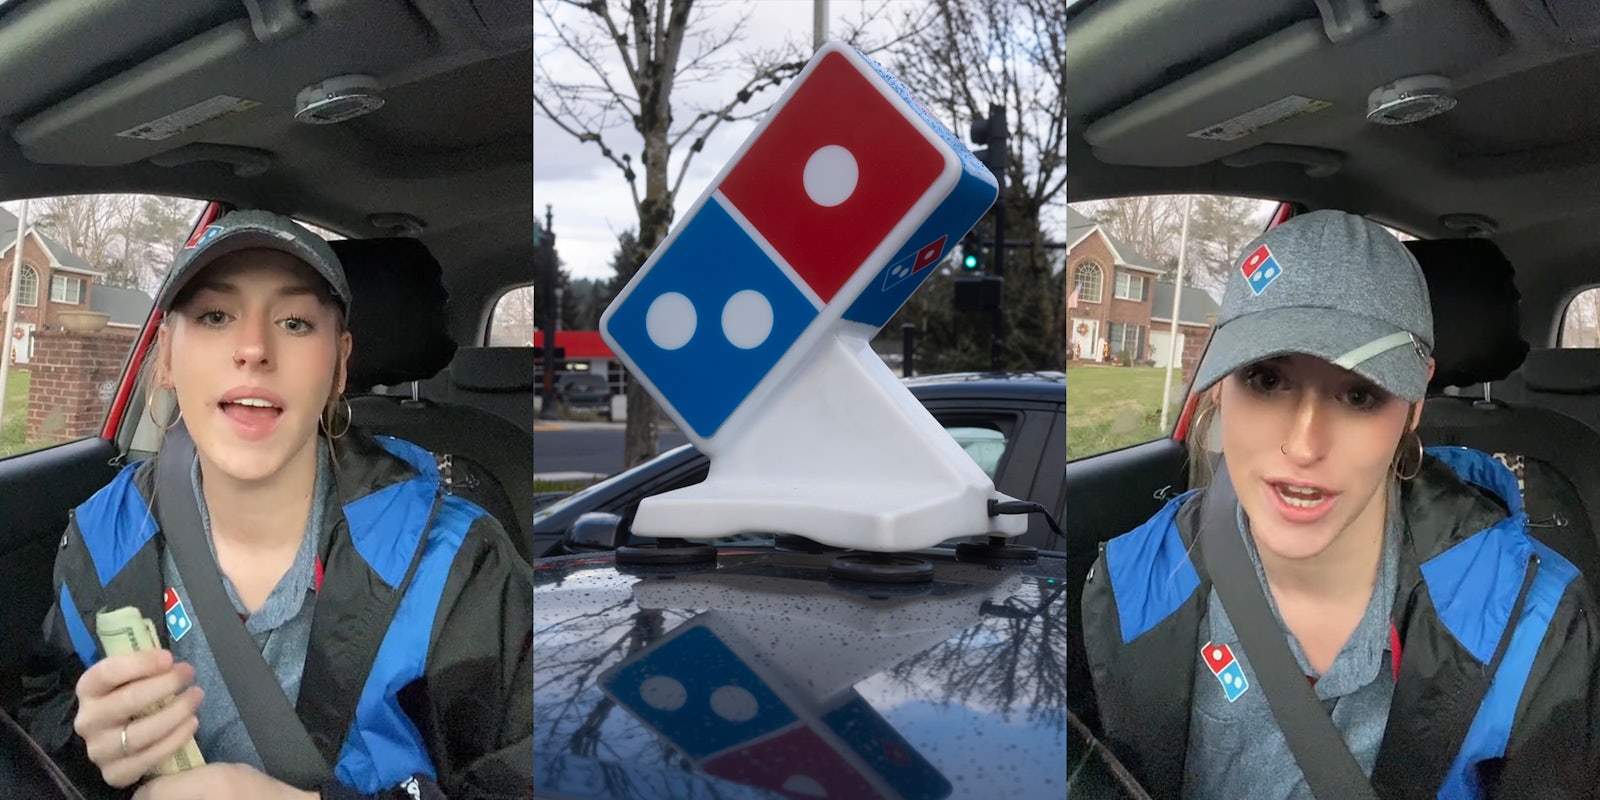 Domino's delivery driver speaking in car holding cash (l) Domino's delivery car with logo sign on car (c) Domino's delivery driver speaking in car (r)